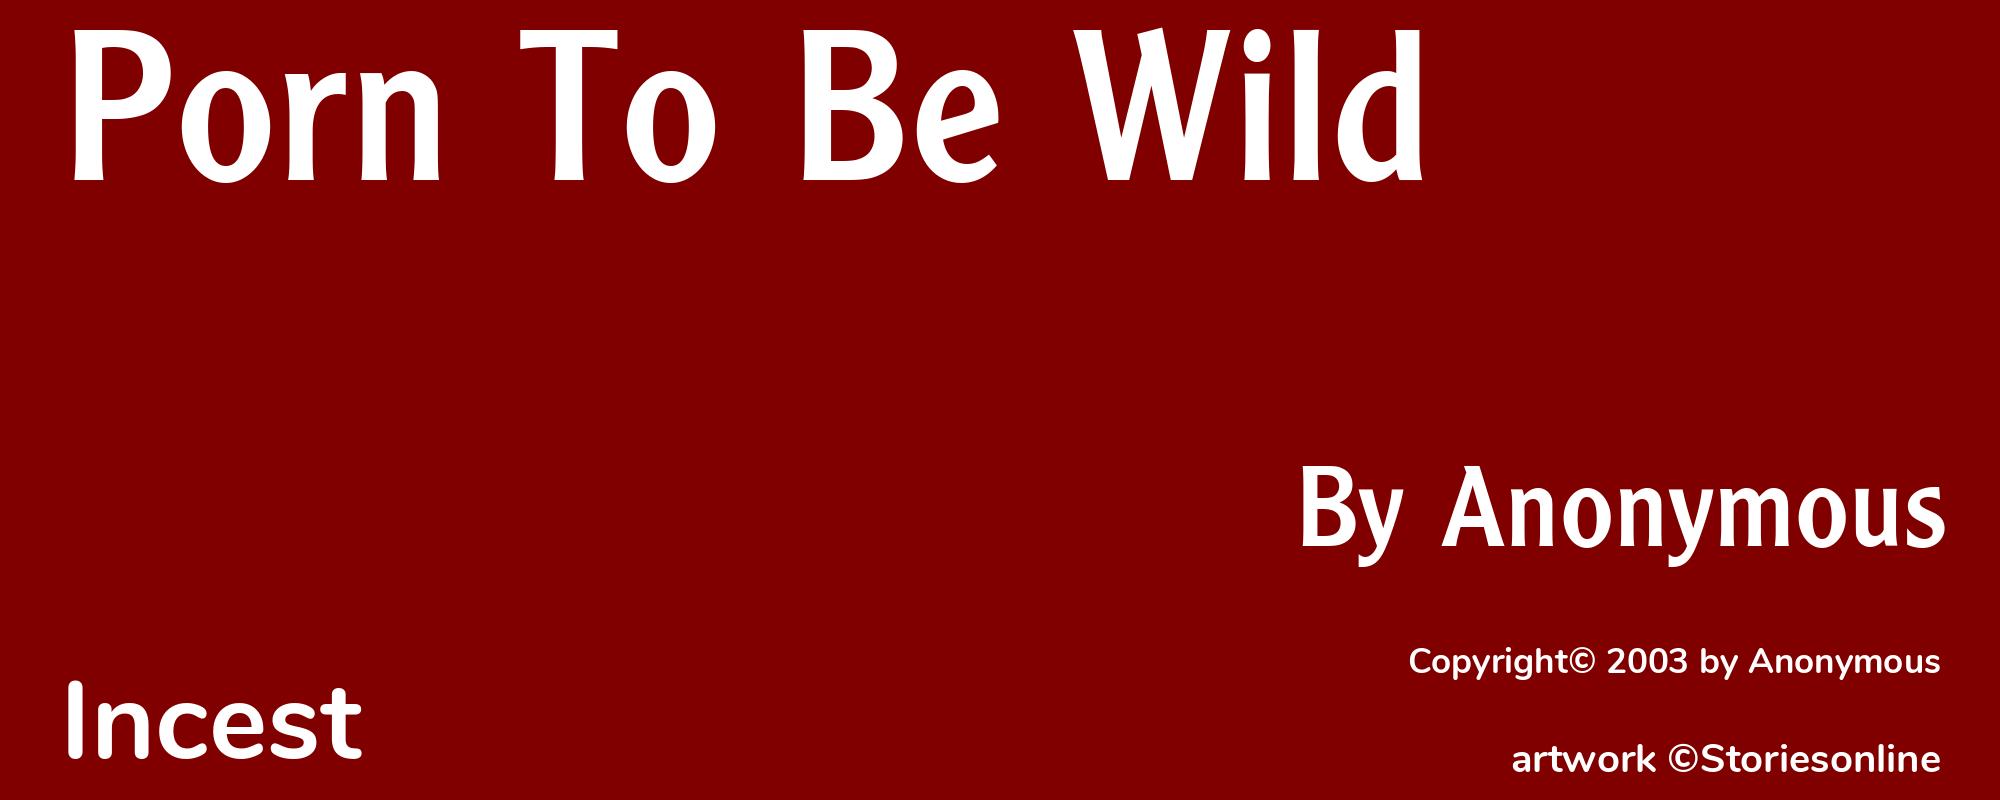 Porn To Be Wild - Cover